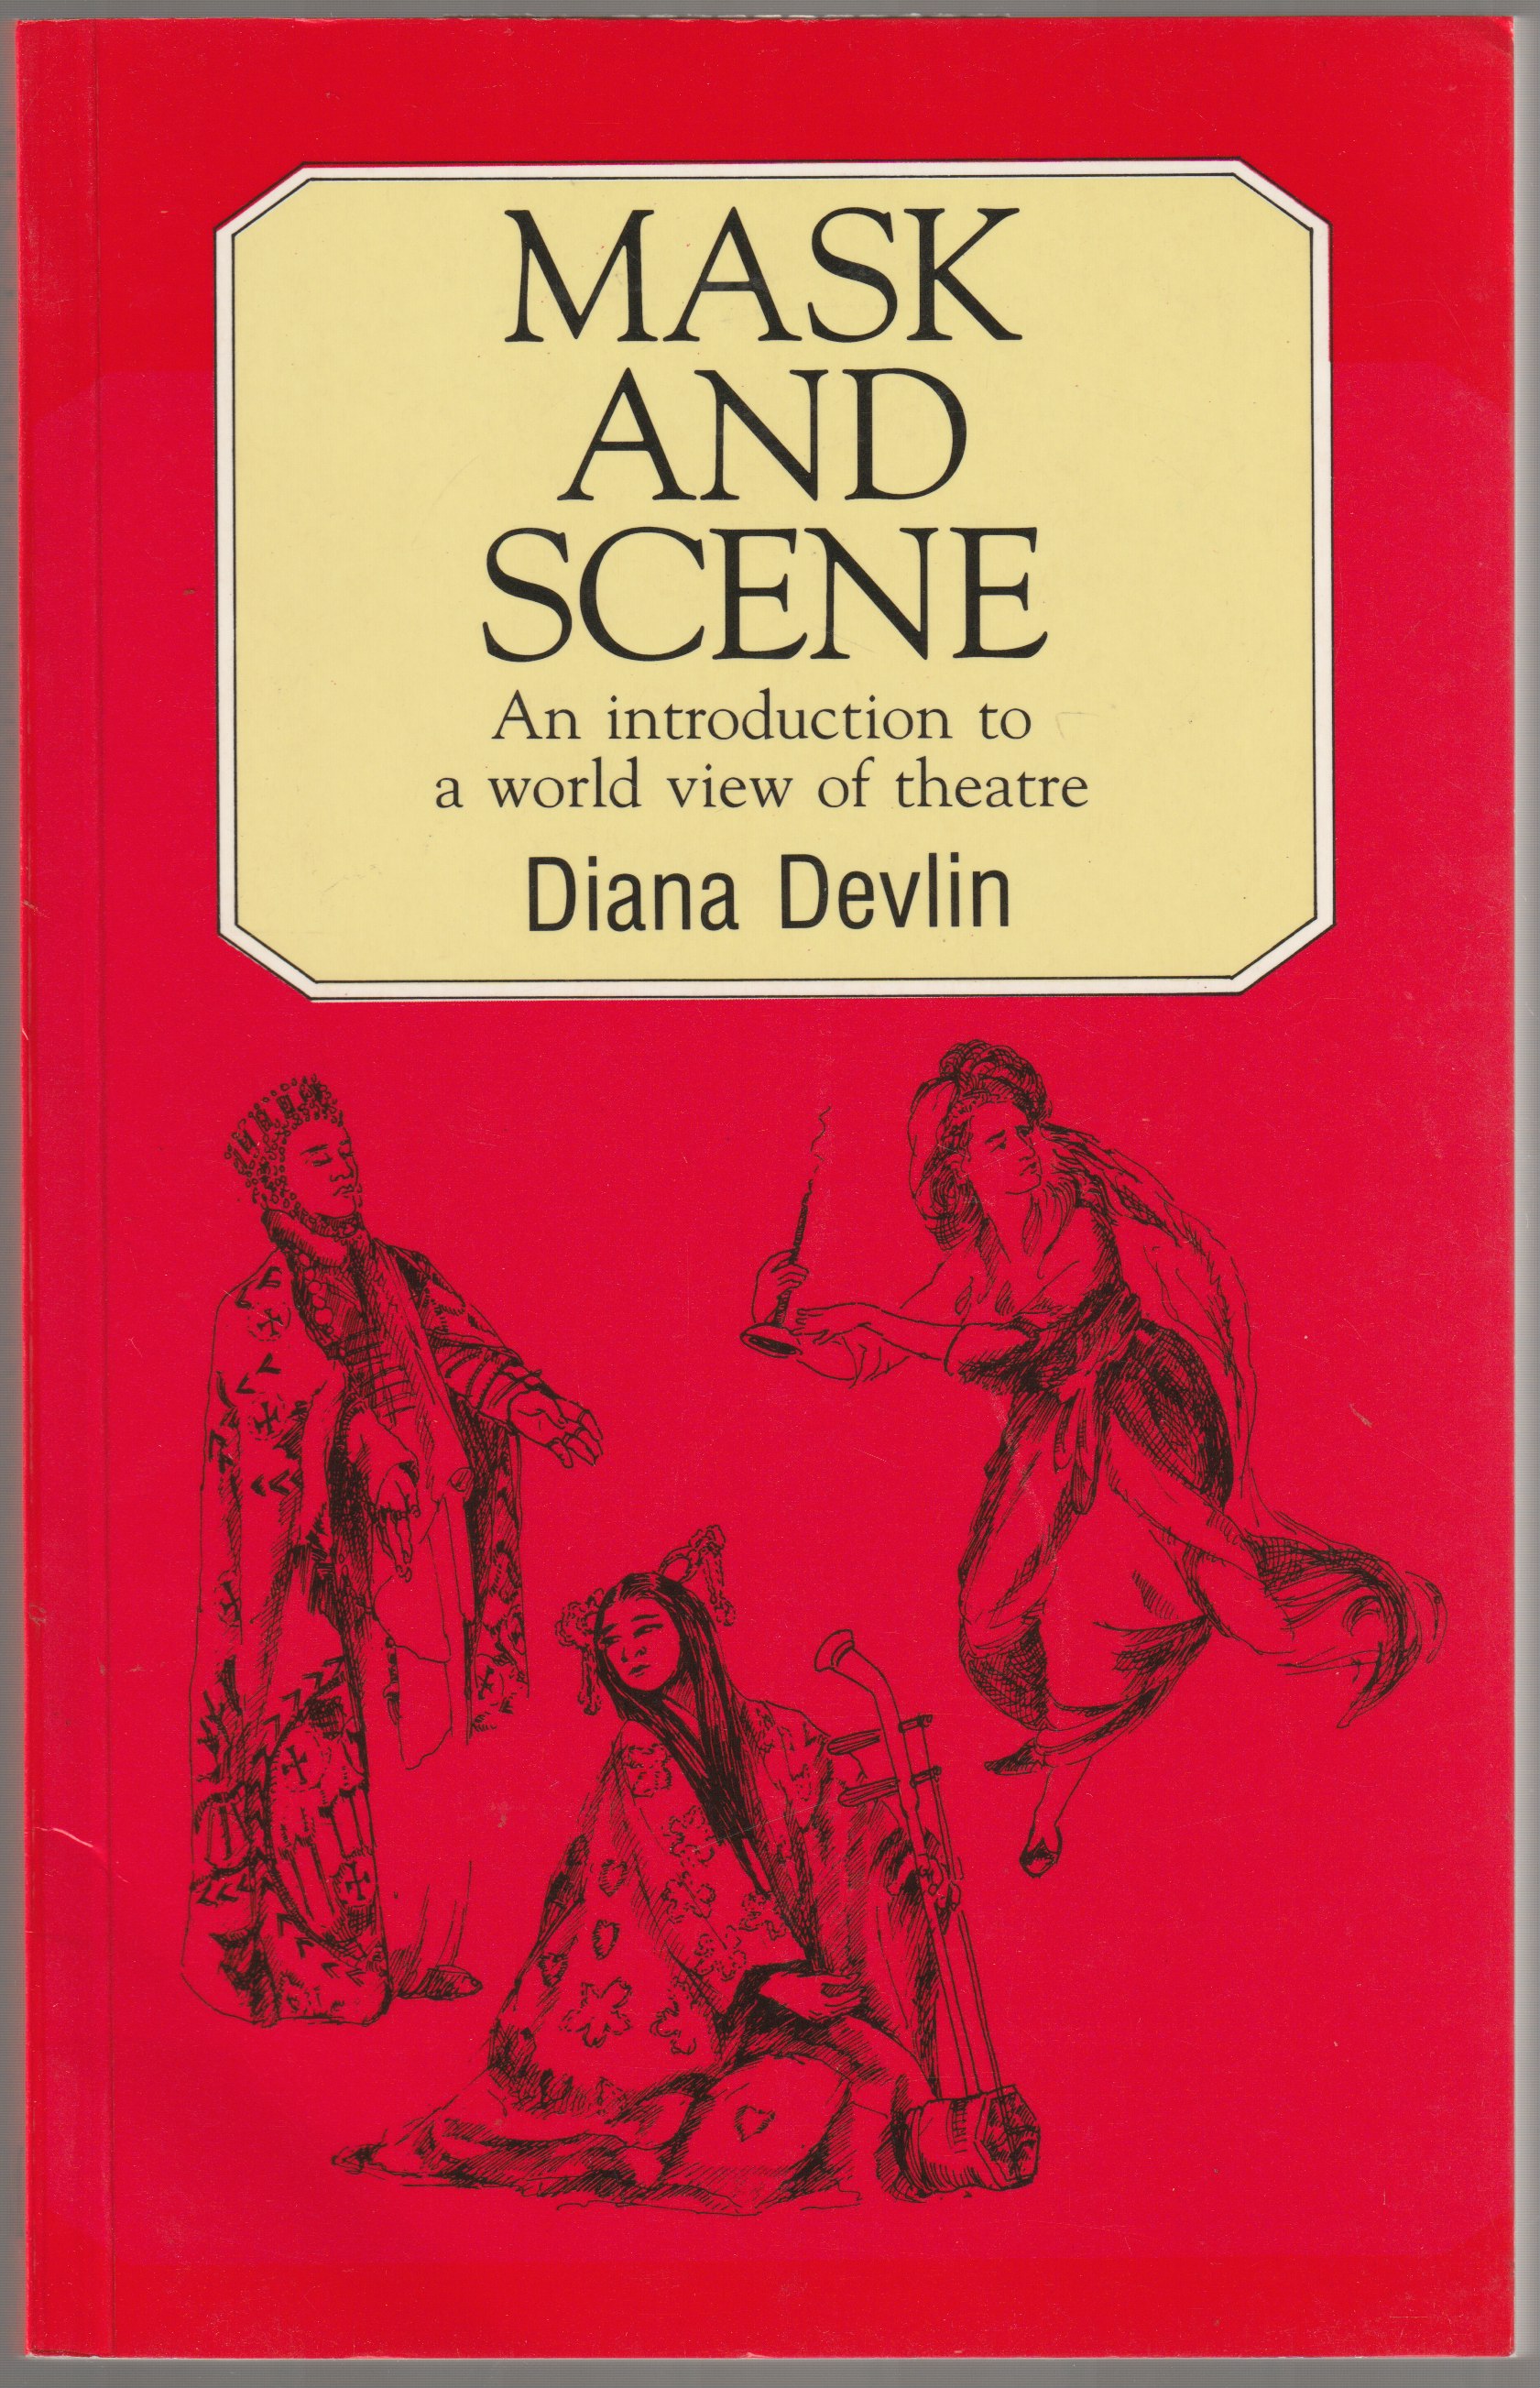 Mask and scene : an introduction to a world view of theatre.